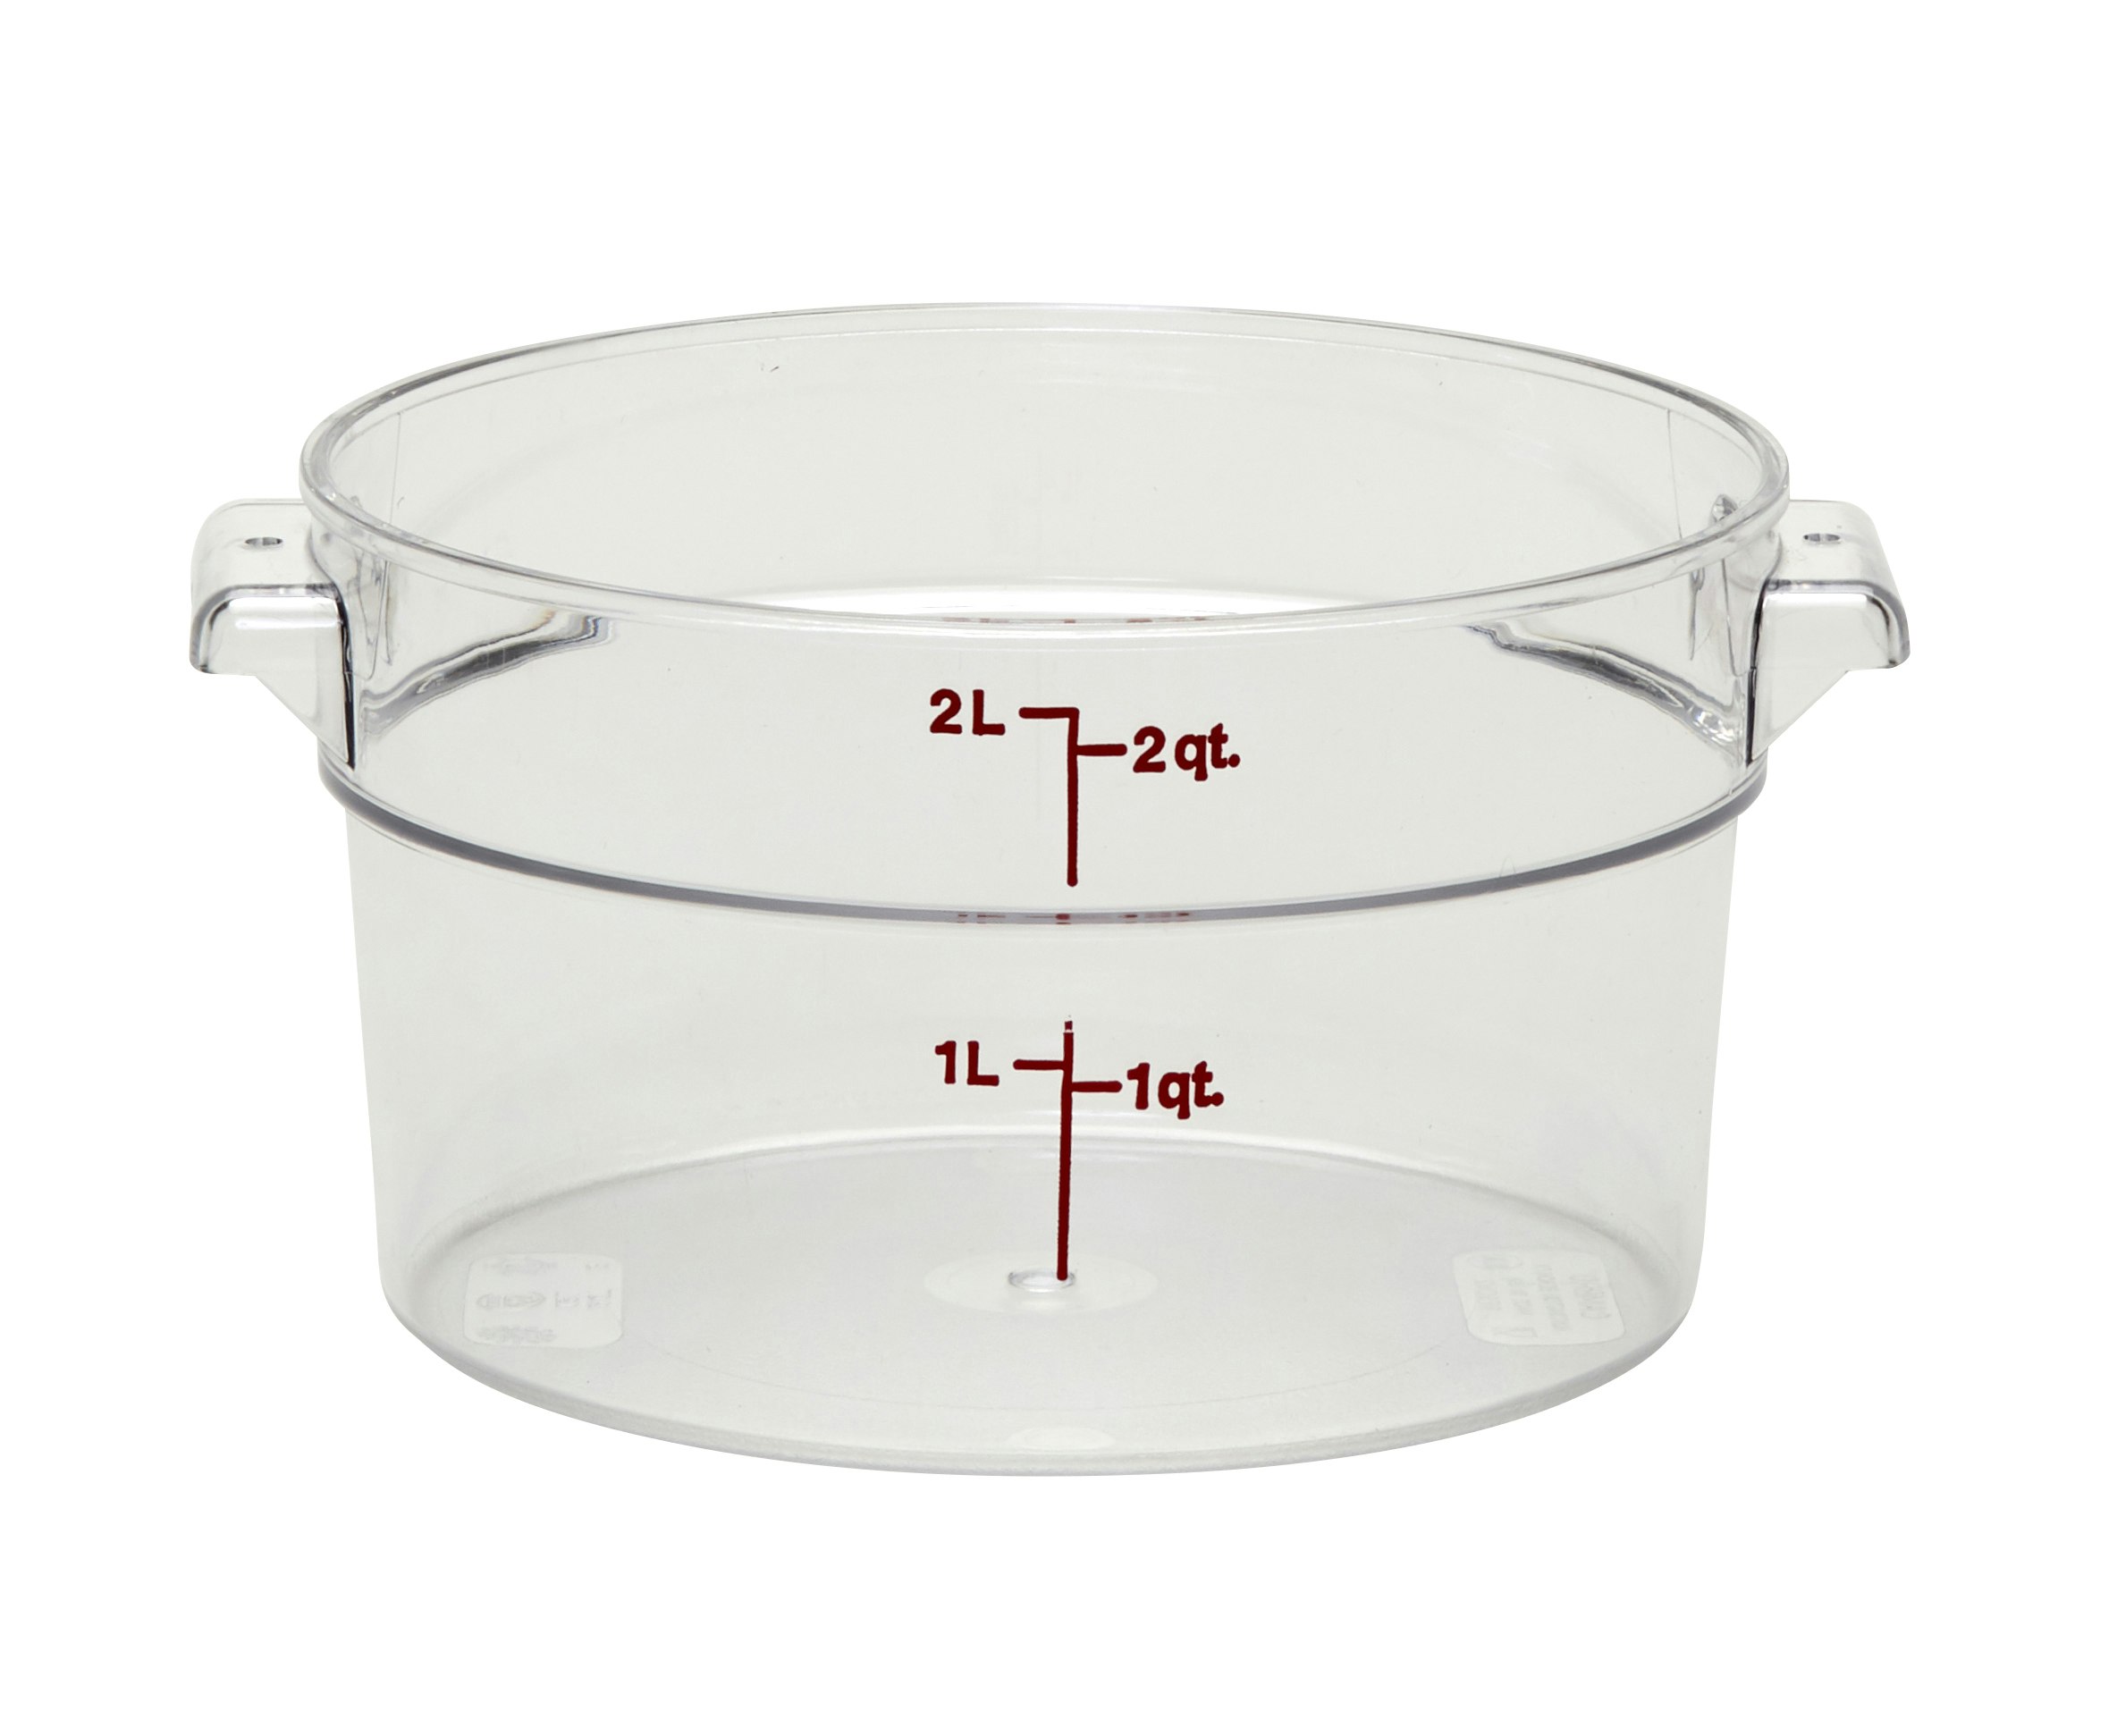 Cambro 6 Quart Round Storage Container with Lid, Clear - 2 pack